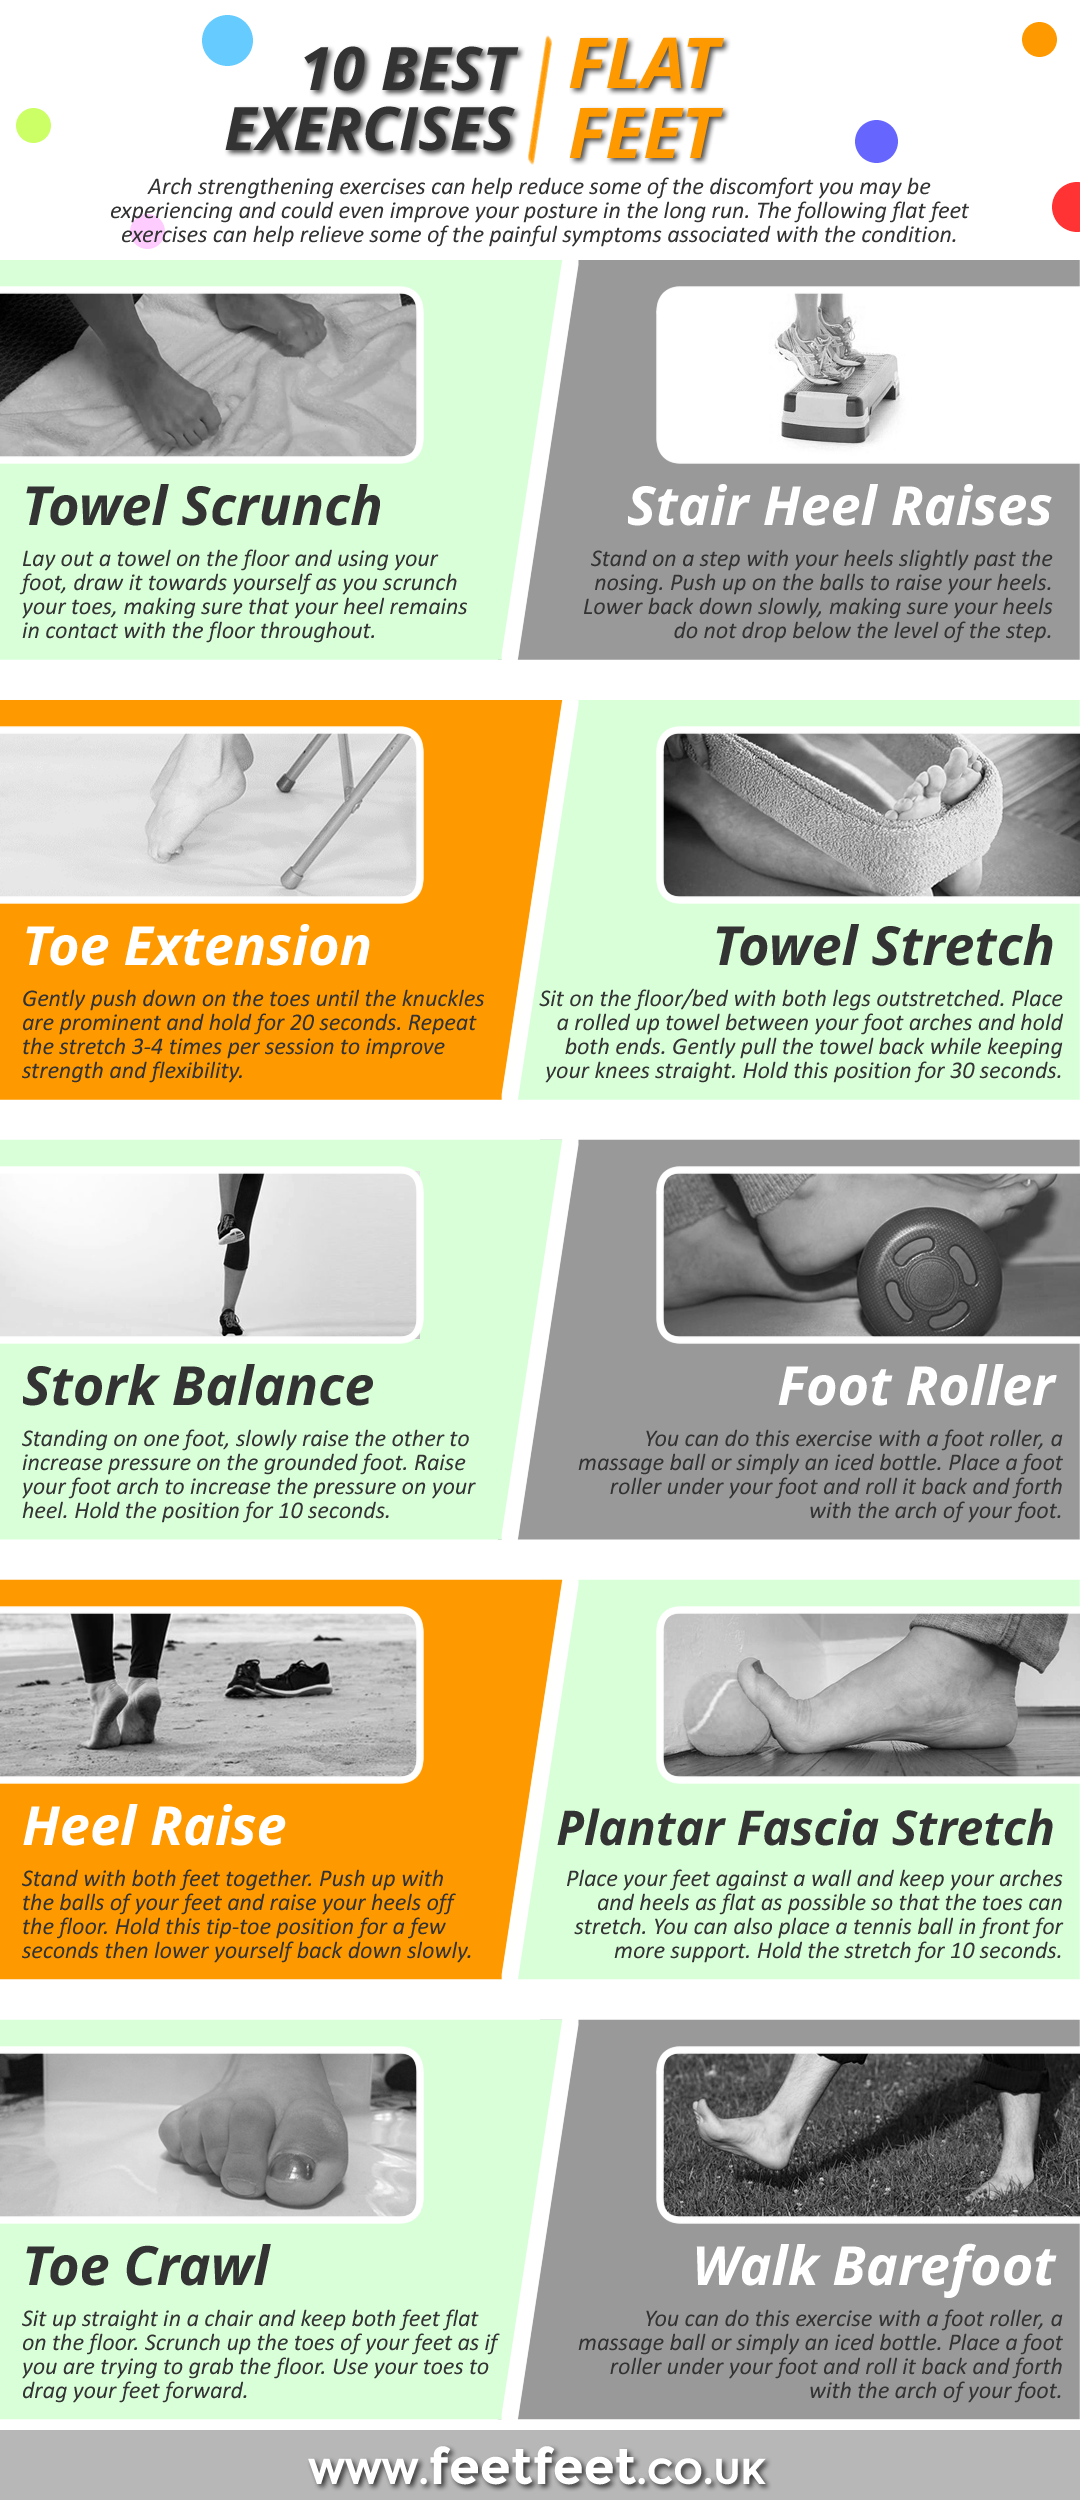 Best Exercises for Flat Feet and Fallen Arches - Somastruct